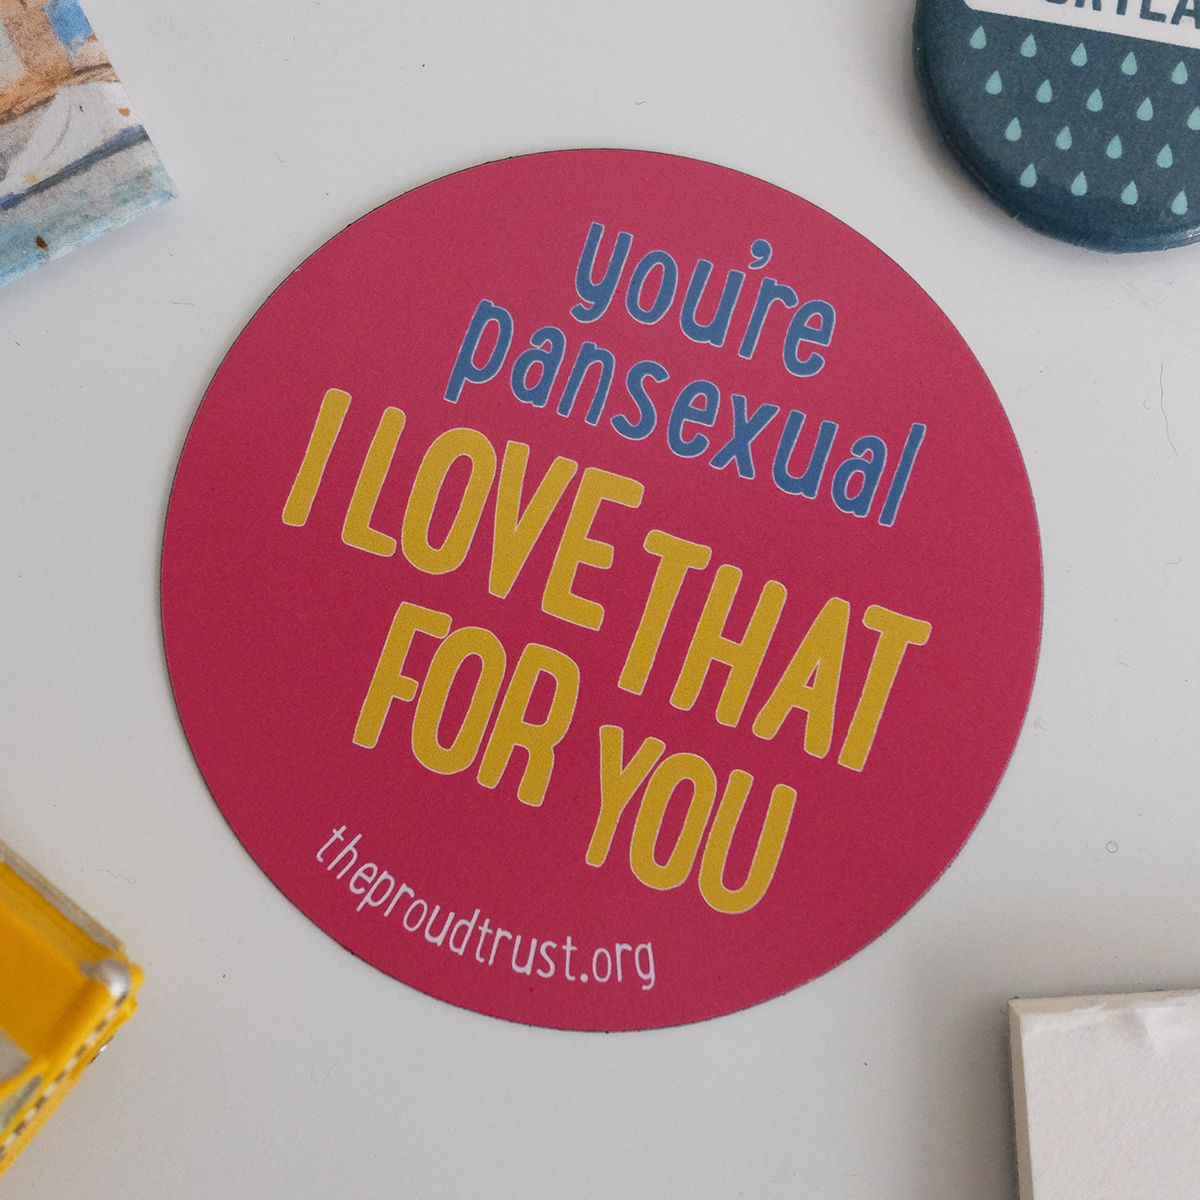 💗💛💙 This #PansexualandPanromanticVisabilityDay, we want to send our love to the pansexual and panromantic people in our community. You're fantastic, #beproud of who you are!